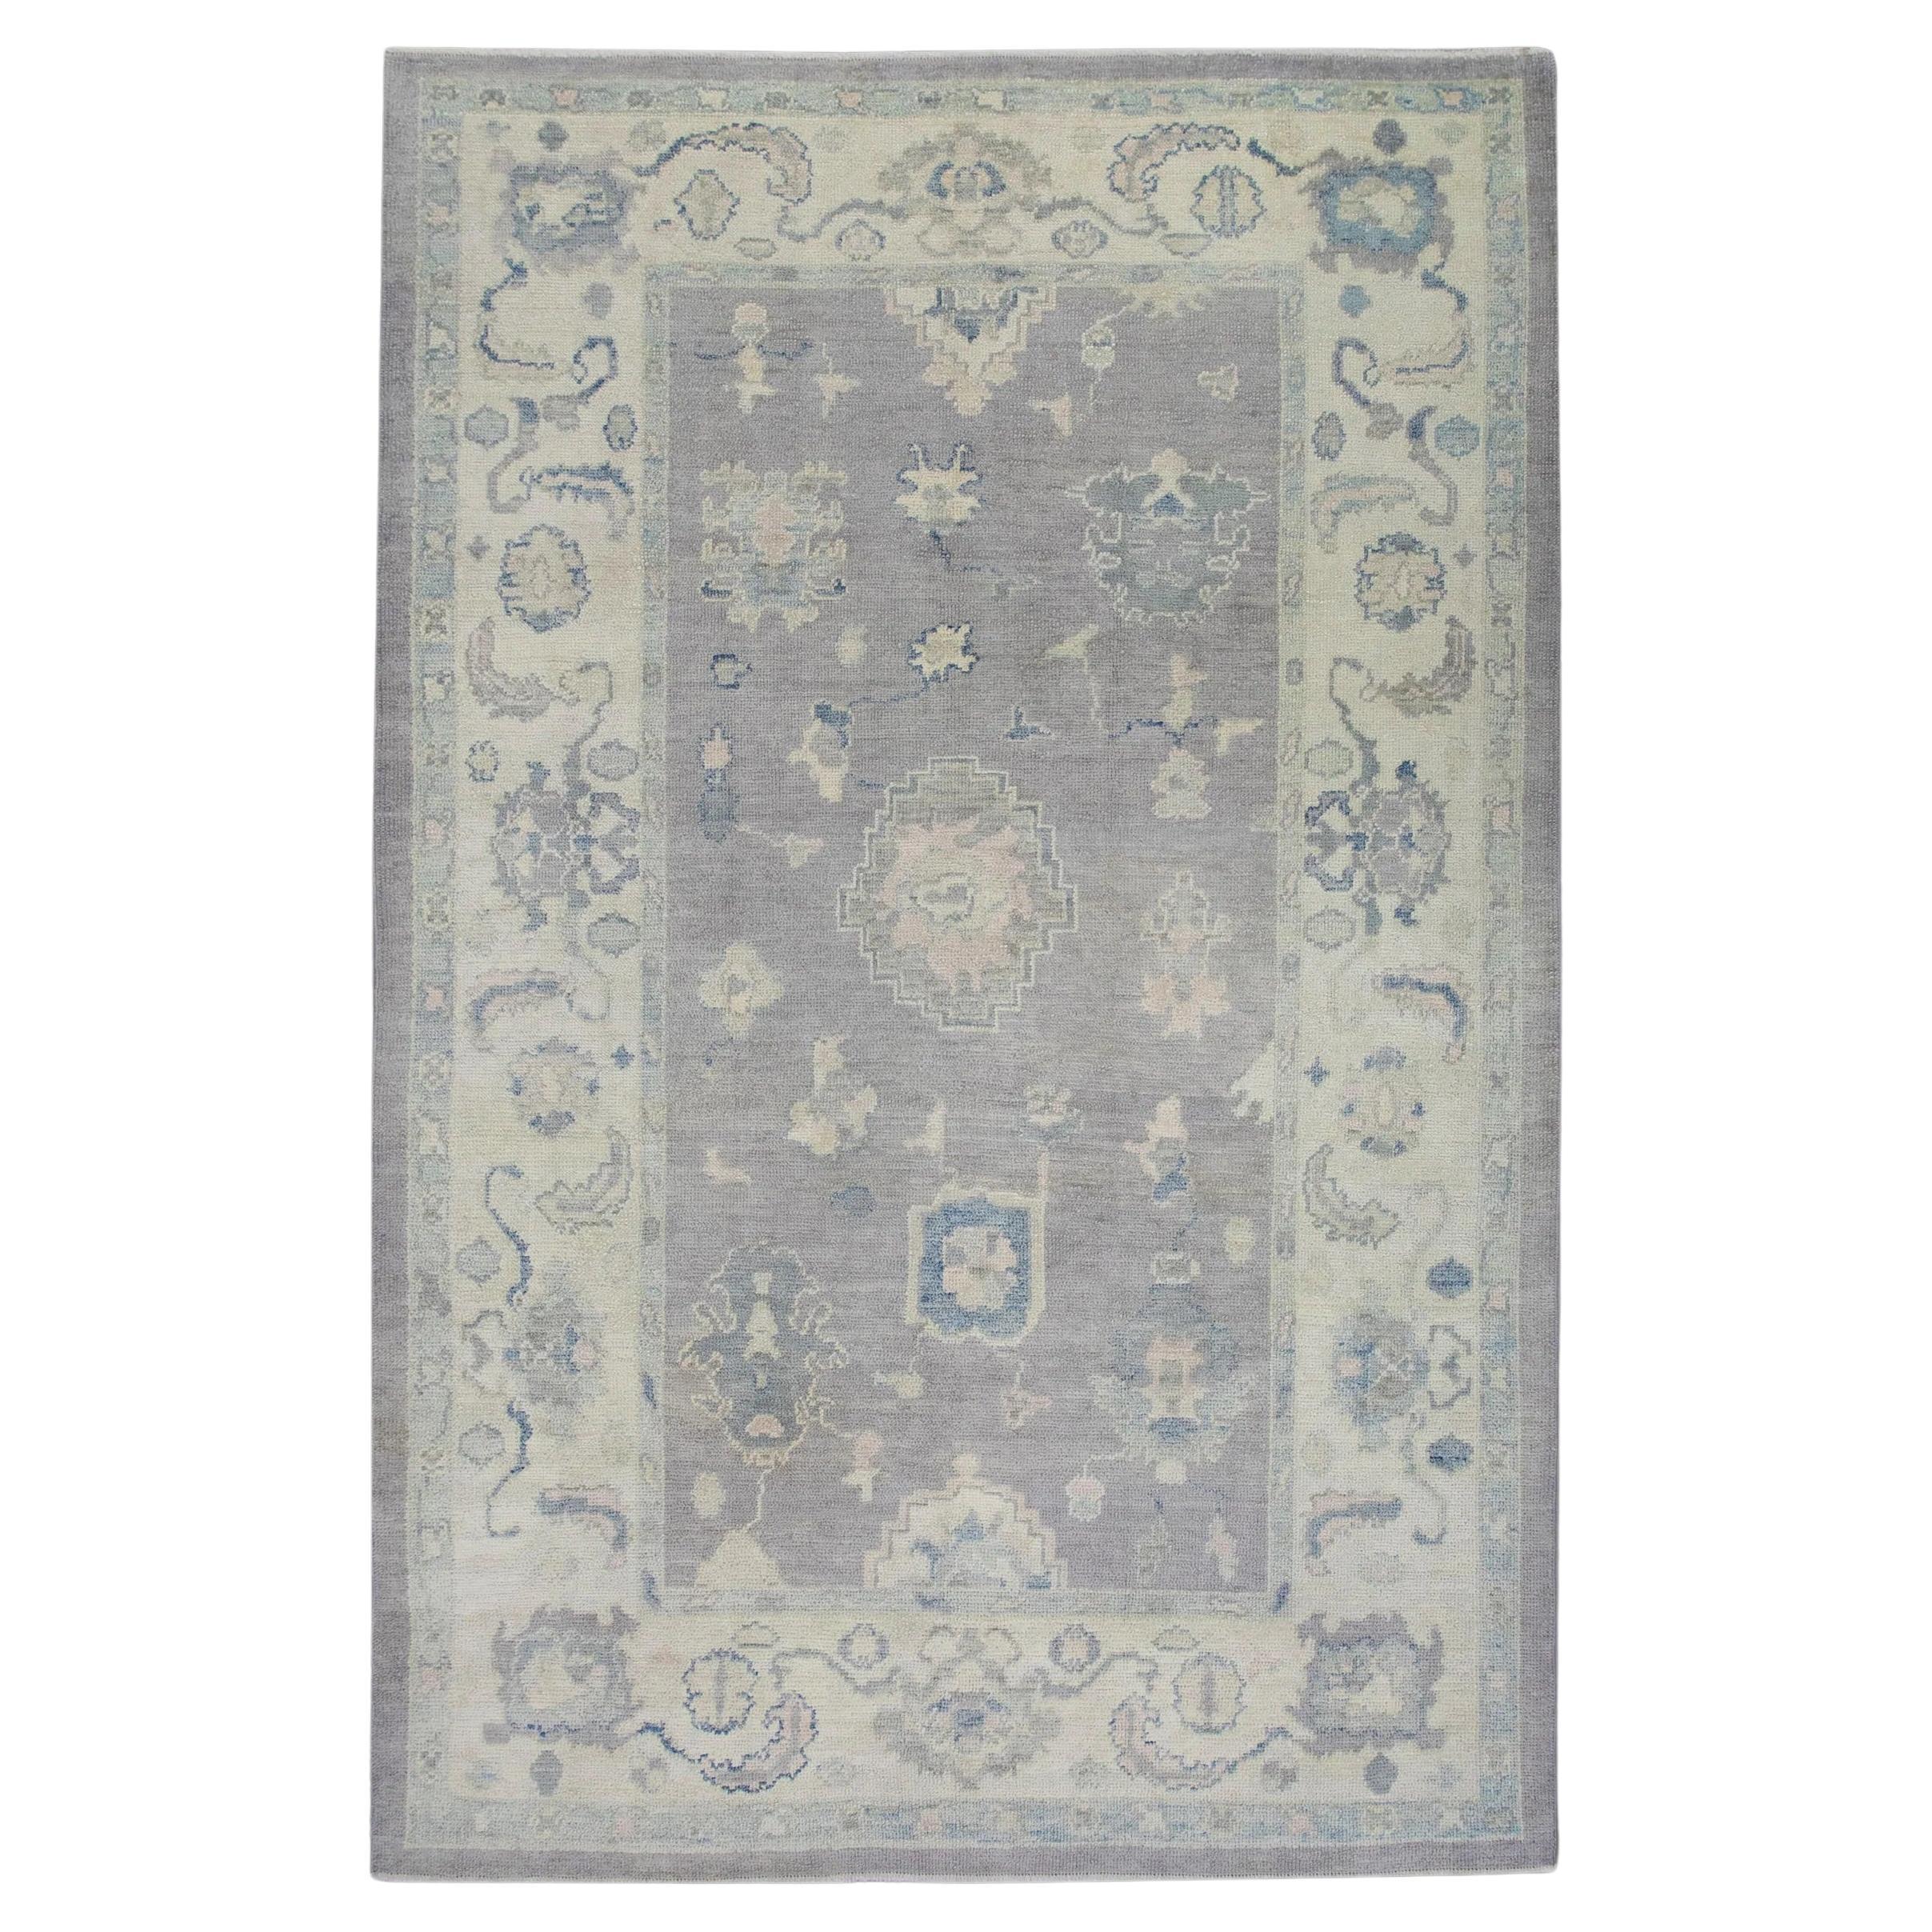 Purple and Blue Handwoven Wool Floral Turkish Oushak Rug 6'5" x 9'6"